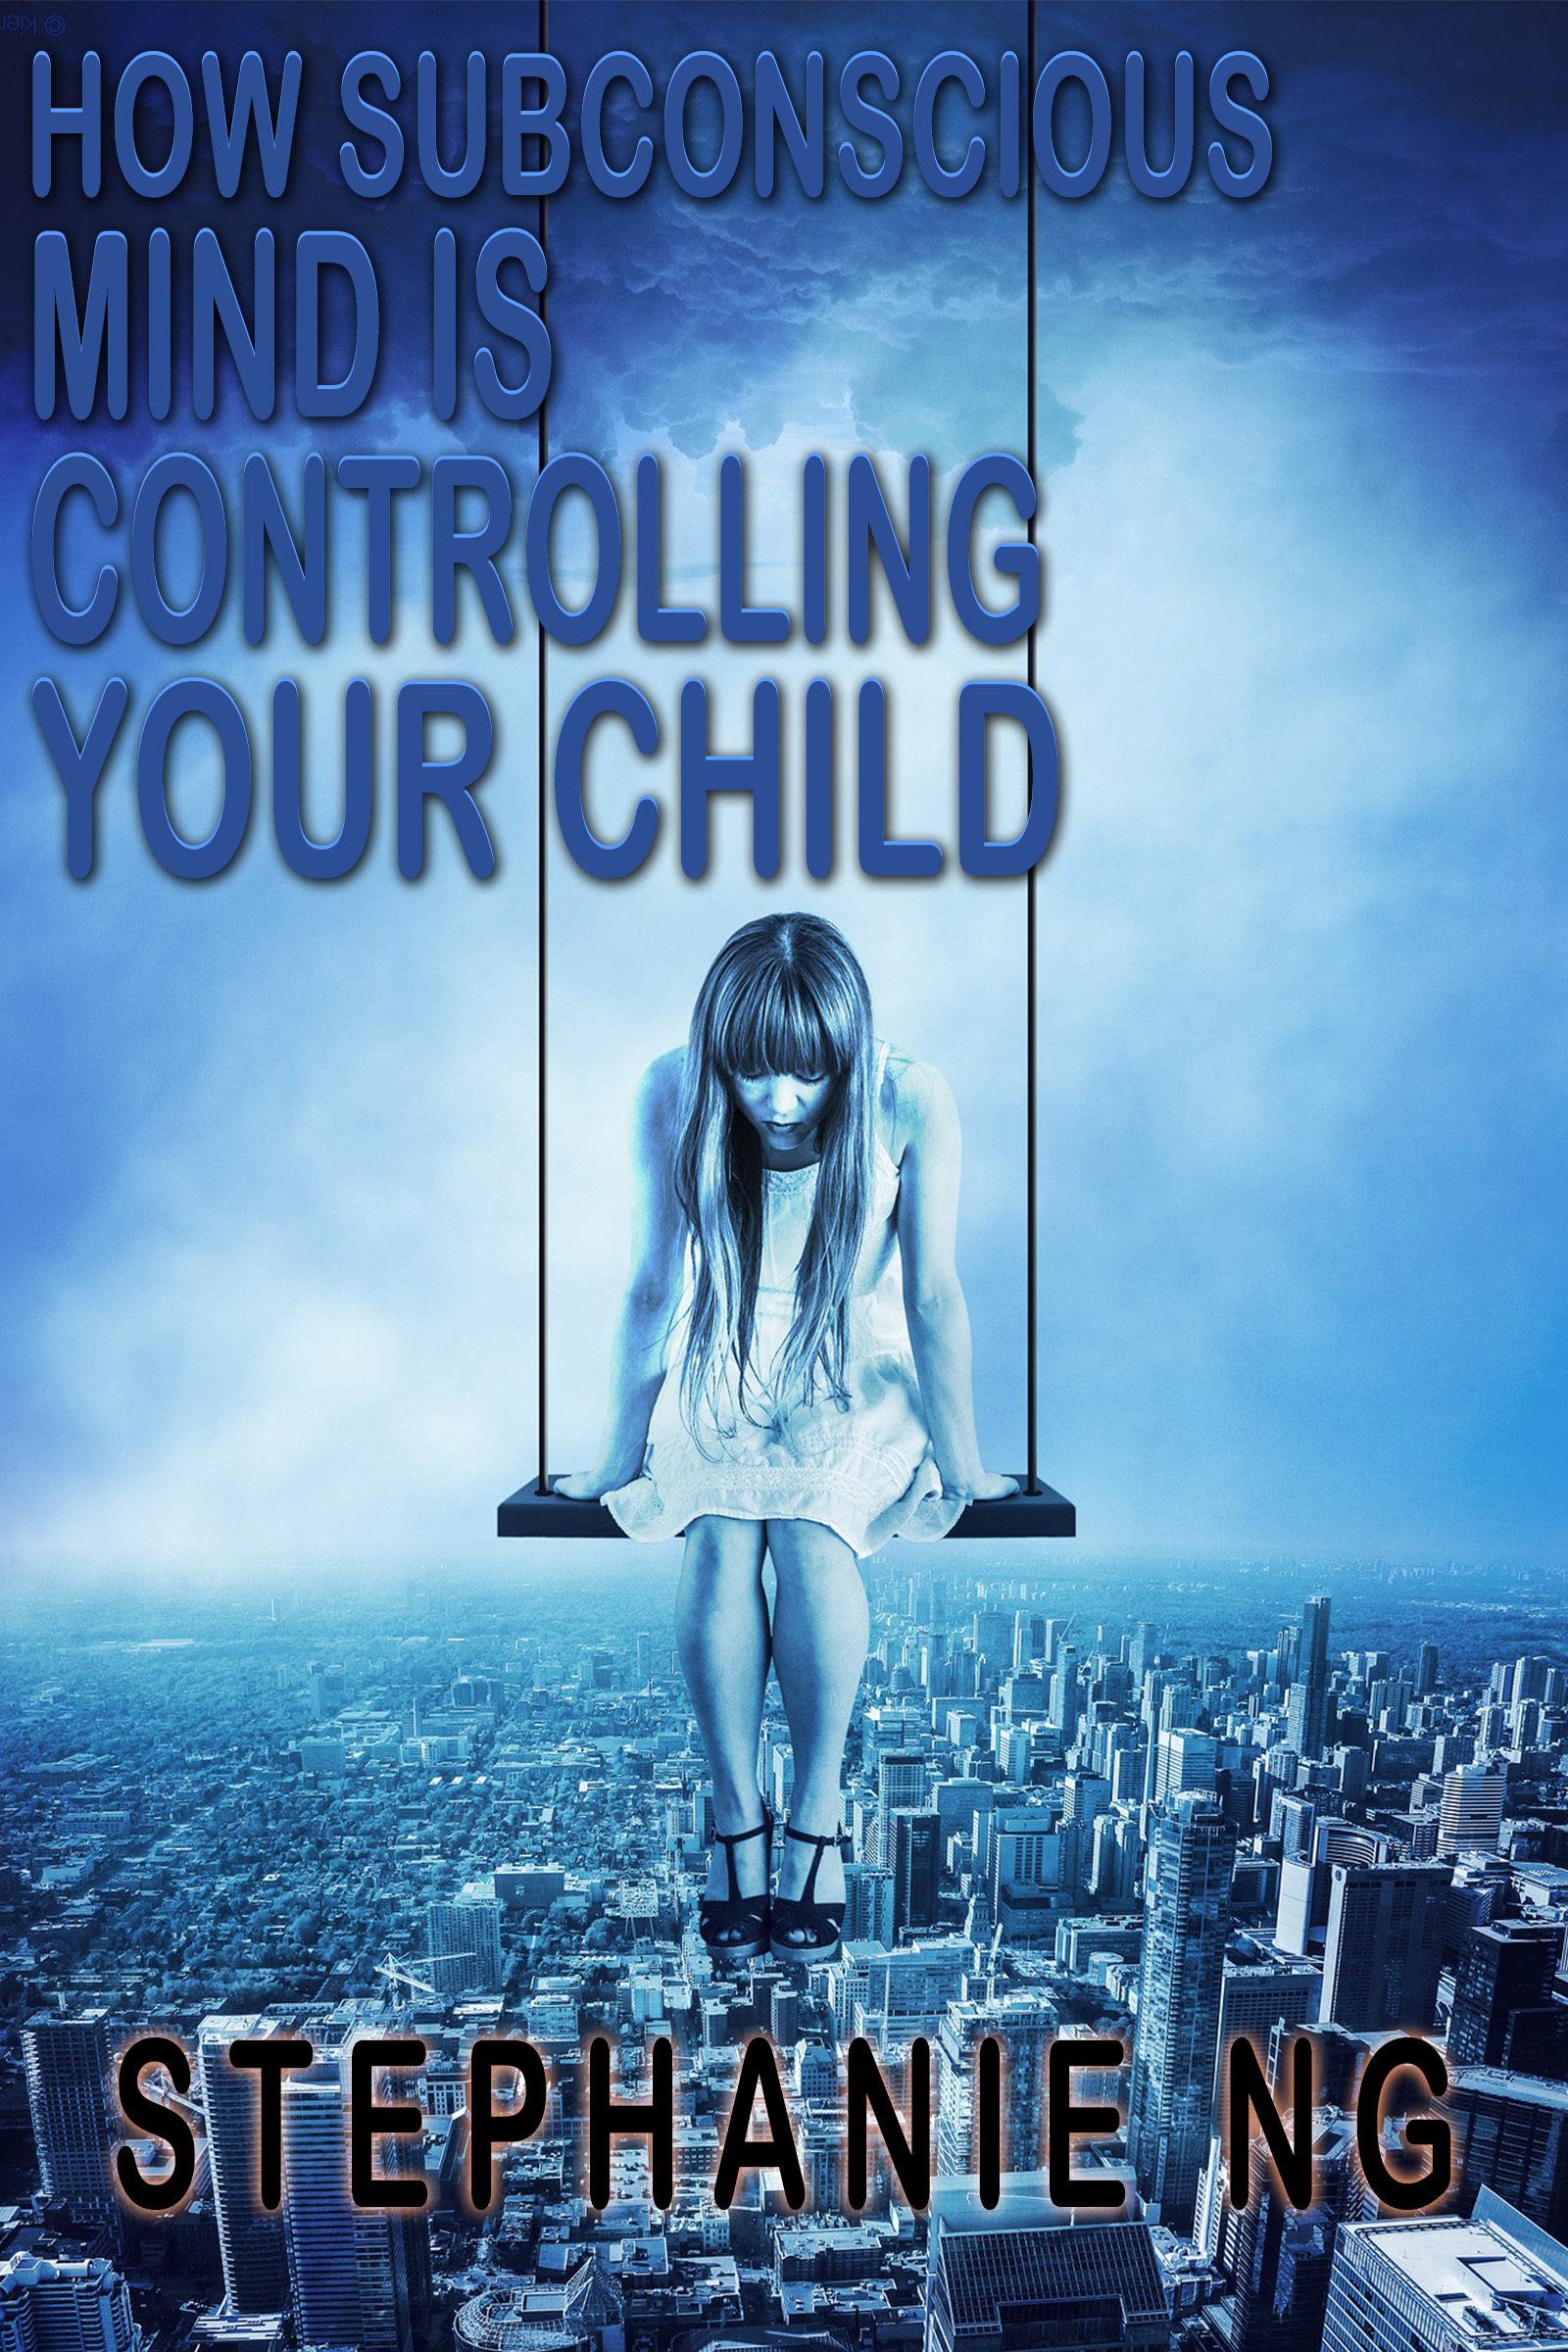 FREE: How subconscious mind is controlling your child by Stephanie Ng